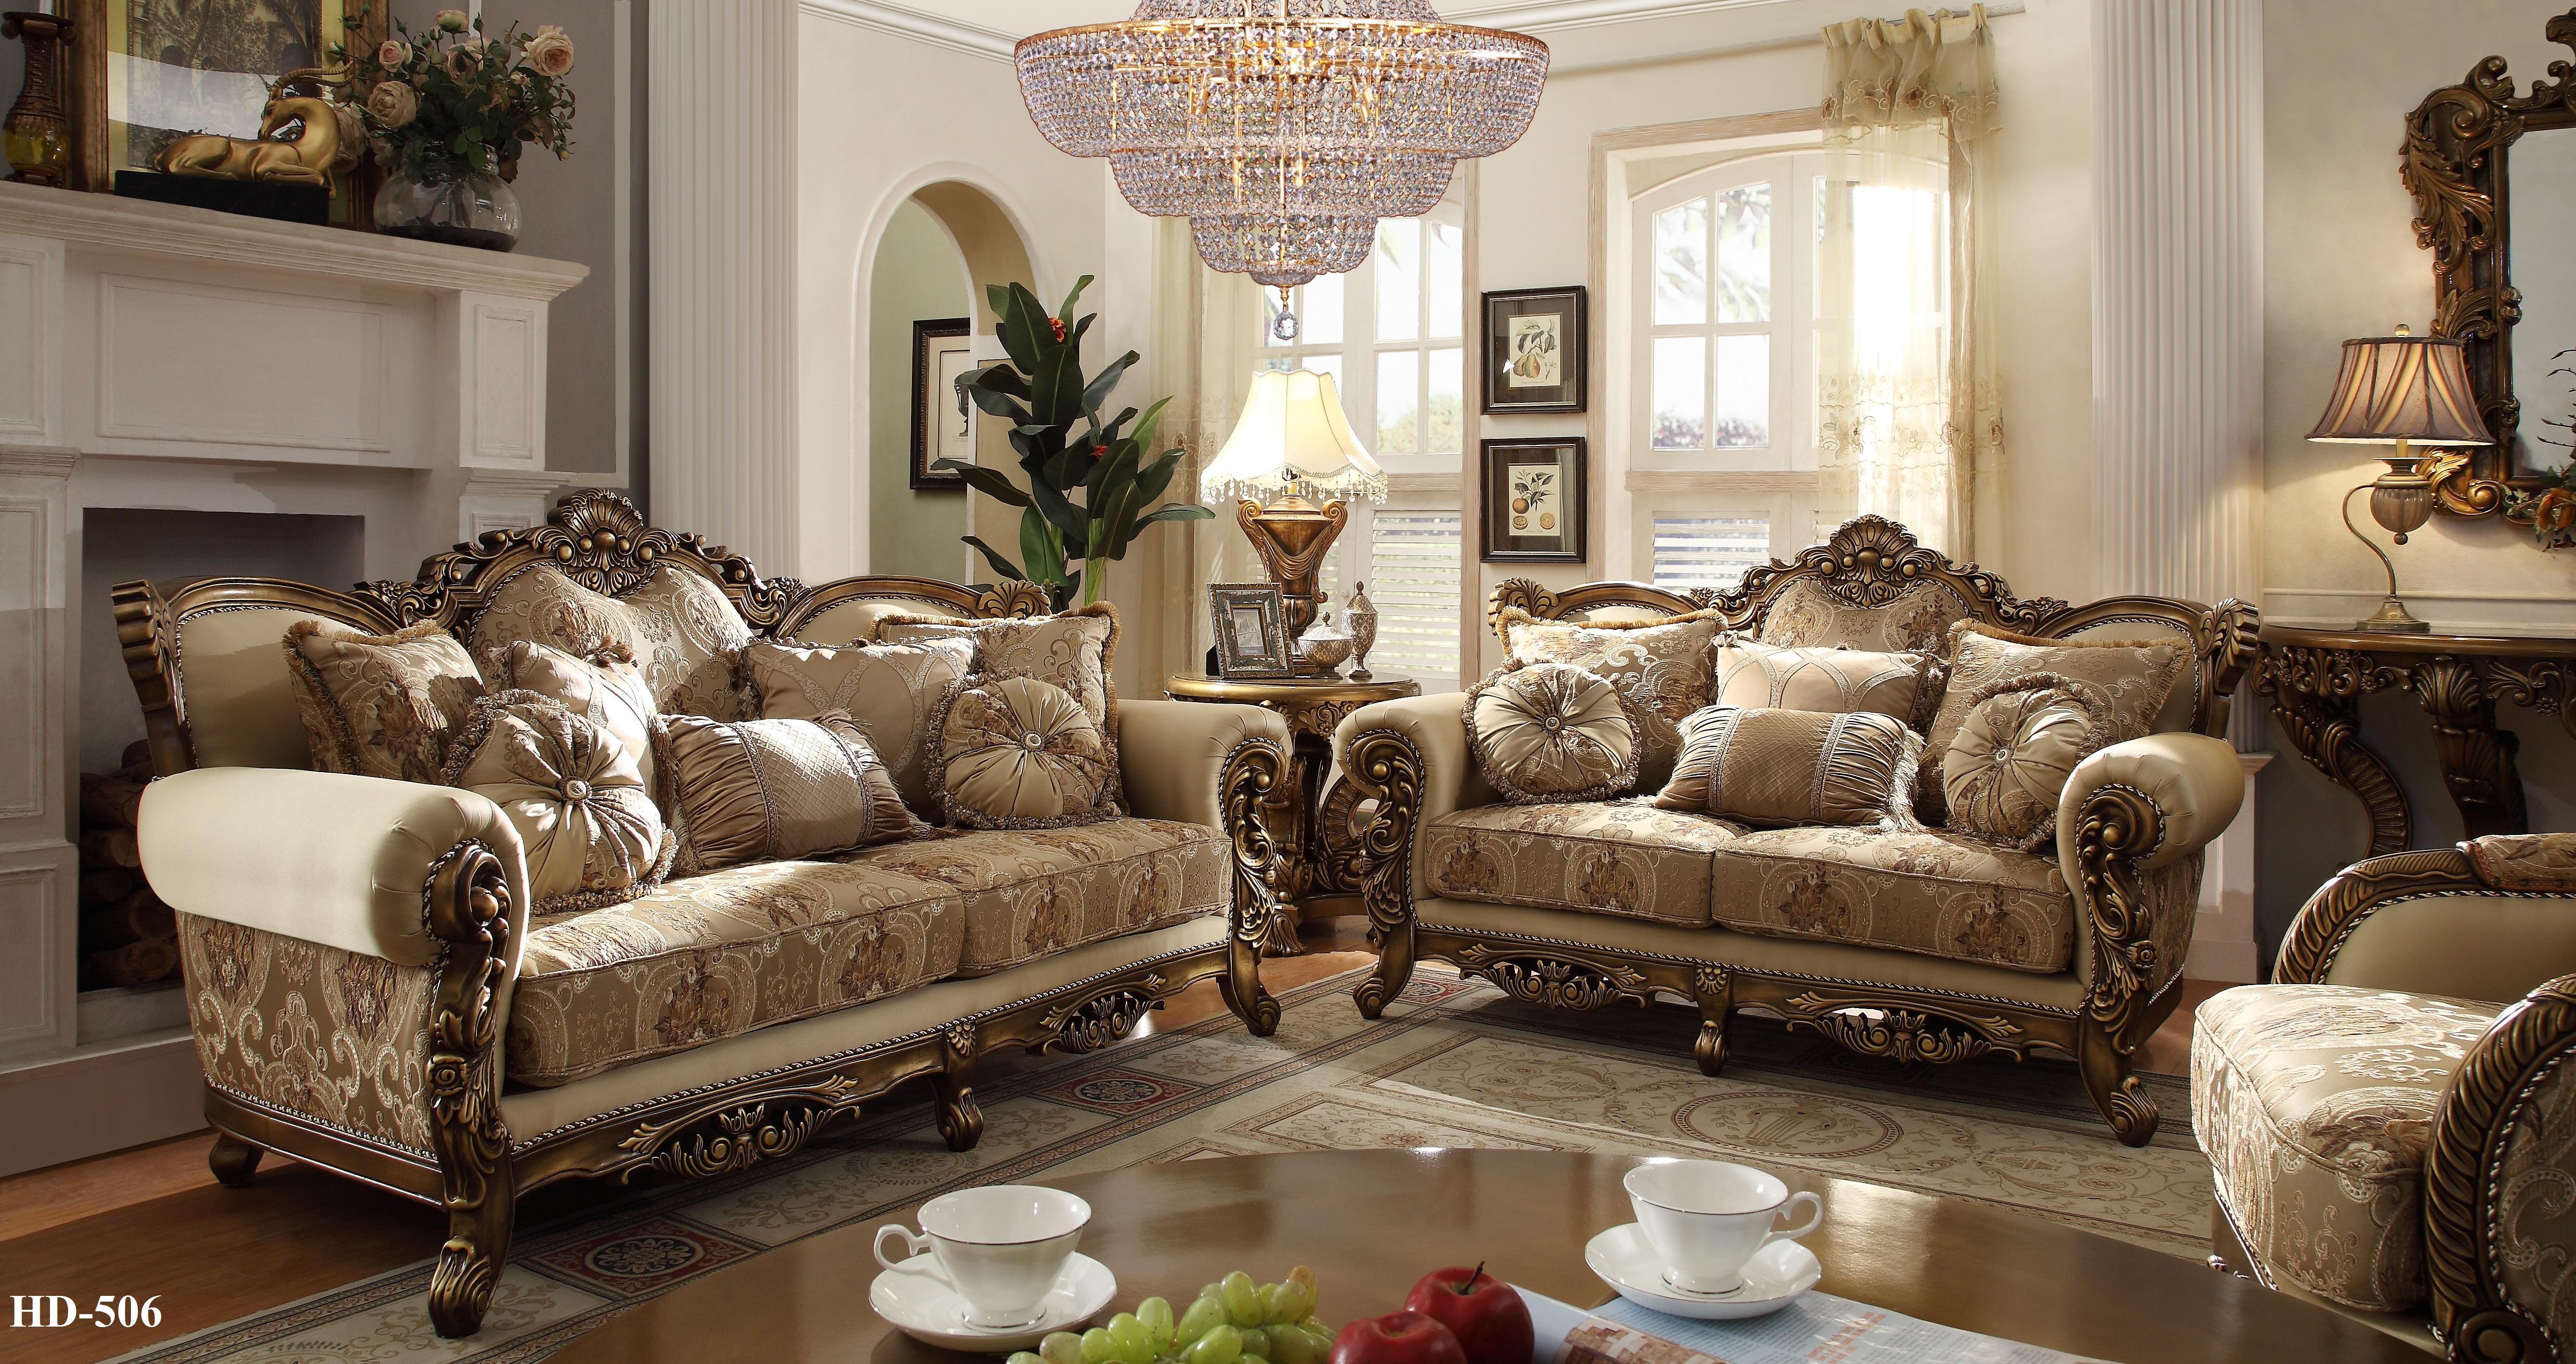 

    
Met Ant Gold & Perfect Brown Sofa Set 4Pcs w/Coffee Tables Traditional Homey Design HD-506
